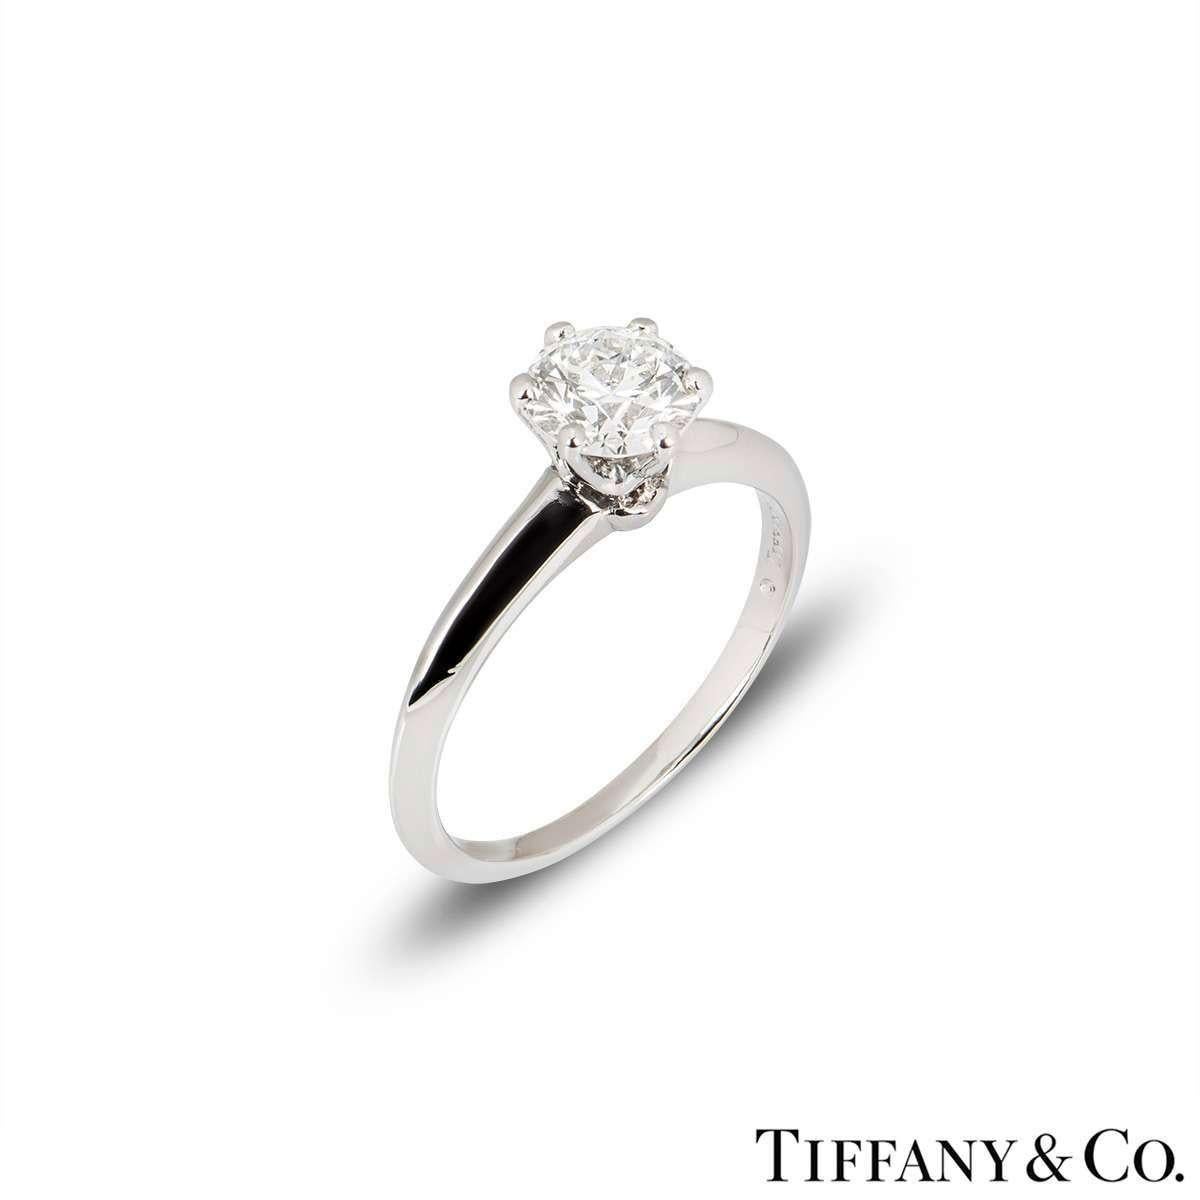 A beautiful platinum diamond ring by Tiffany & Co. from The Setting collection. The ring comprises of a round brilliant cut diamond in a 6 claw setting with a weight of 1.05ct, G colour and VS1 clarity. The ring has a gross weight of 4.8 grams and